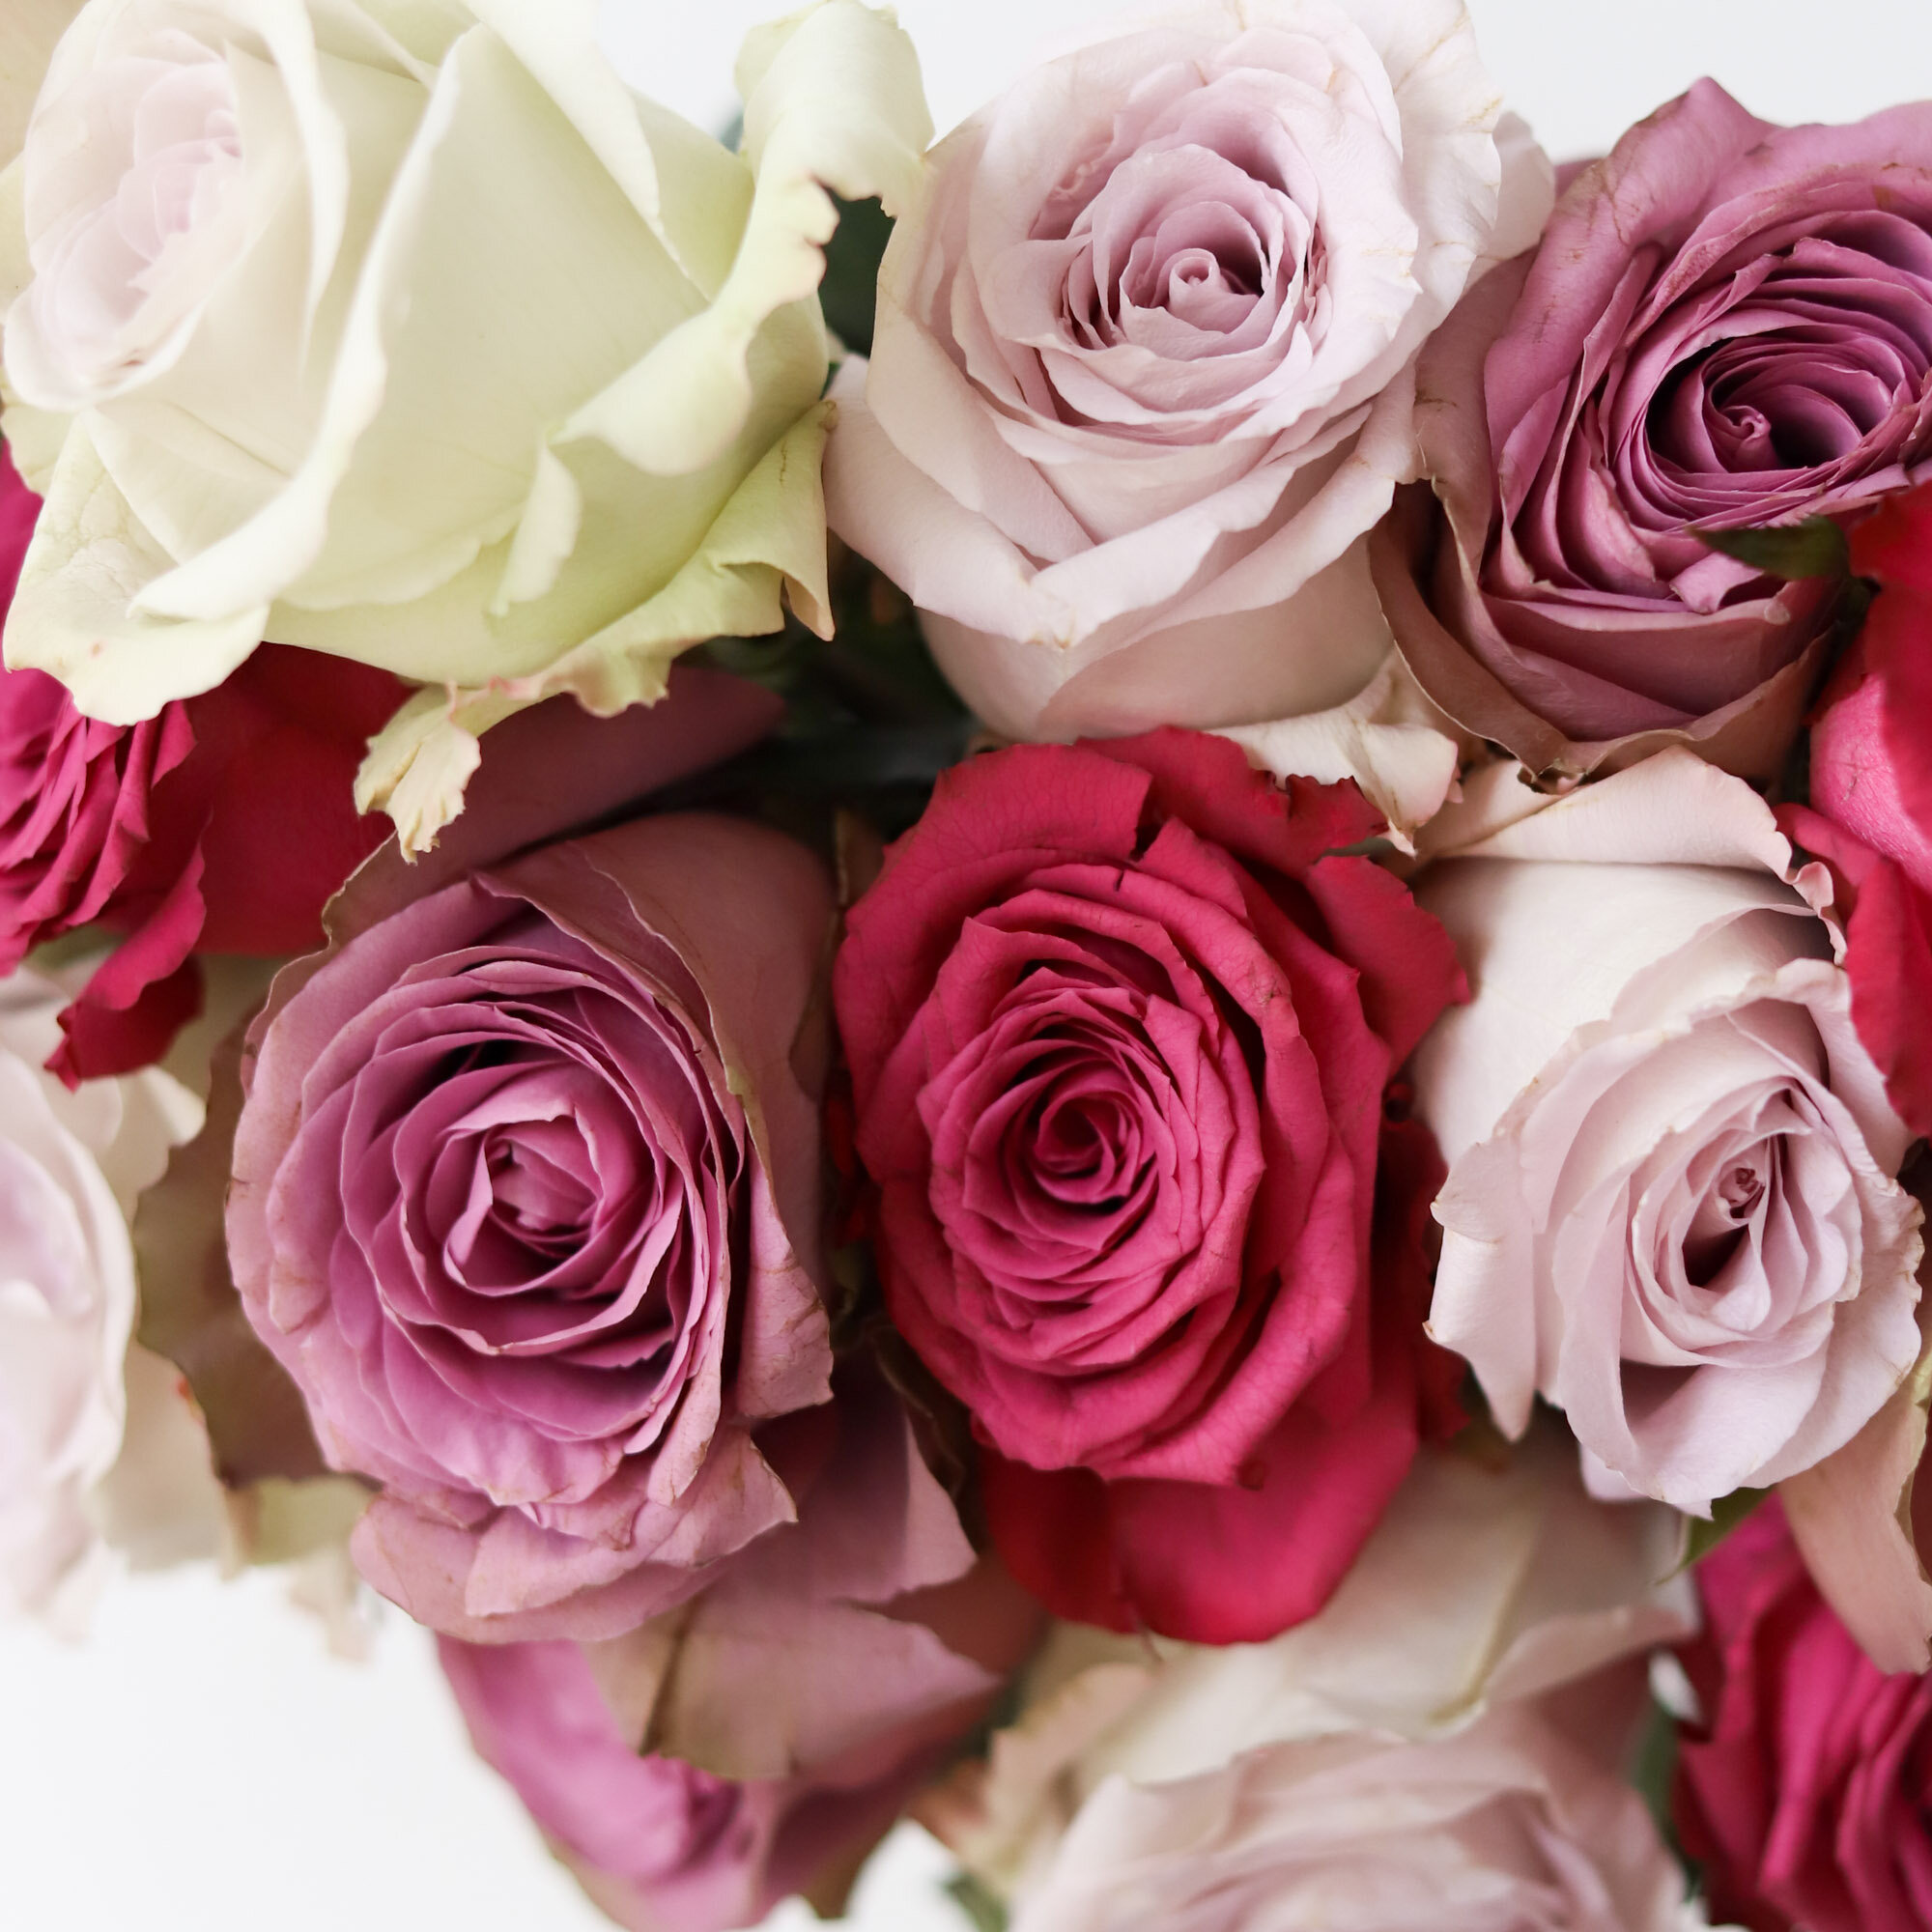 A close up of red, dark pink, and white roses